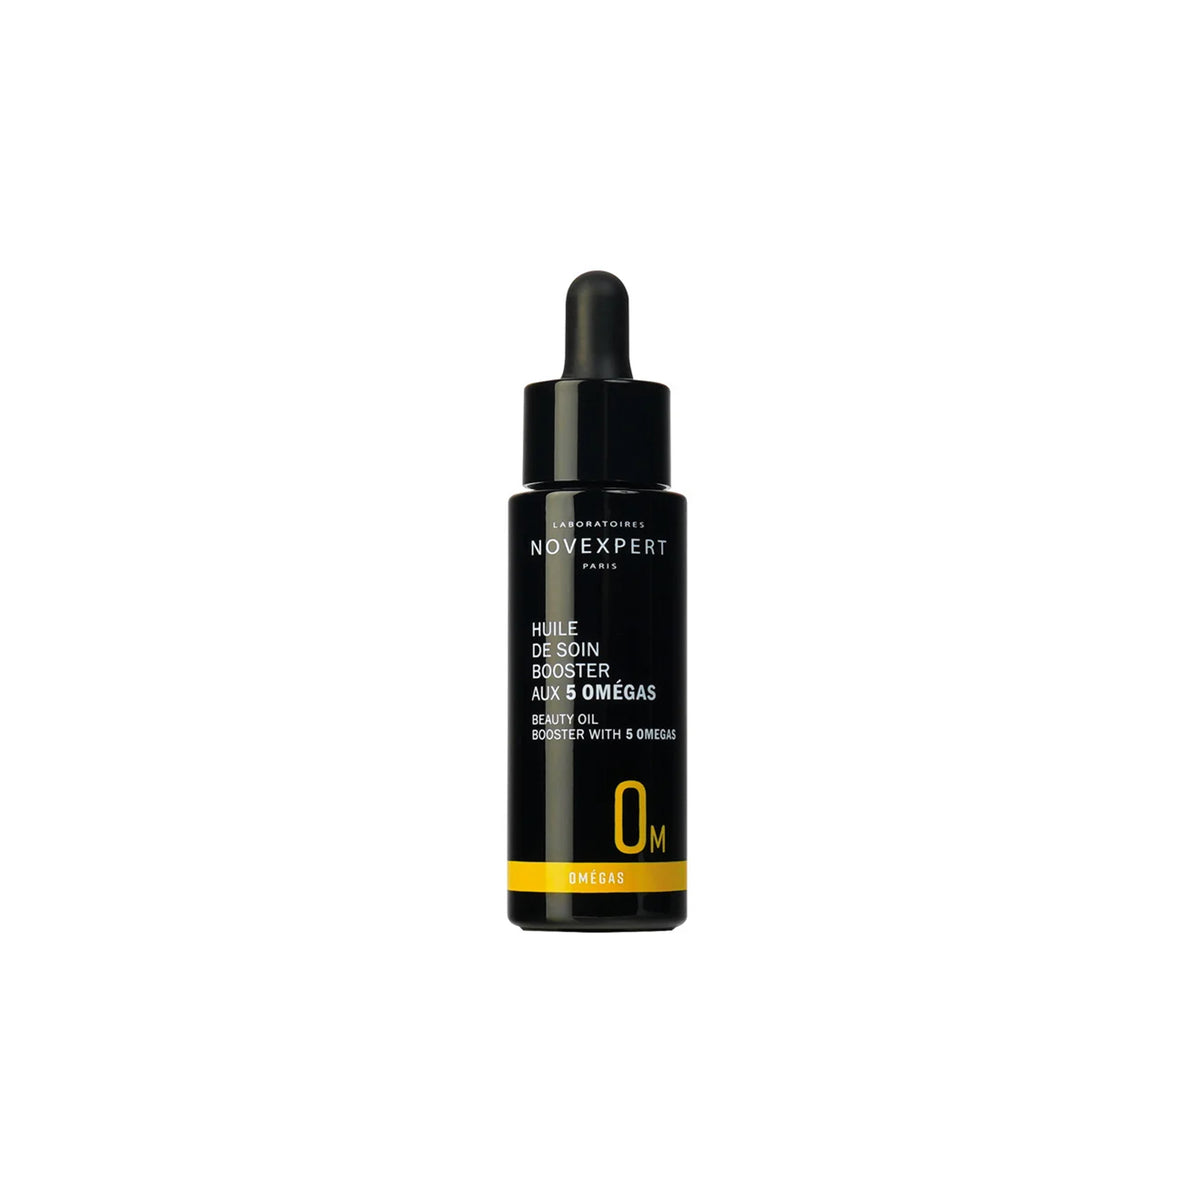 Novexpert Omega Beauty Oil Booster with 5 Omegas 30ml